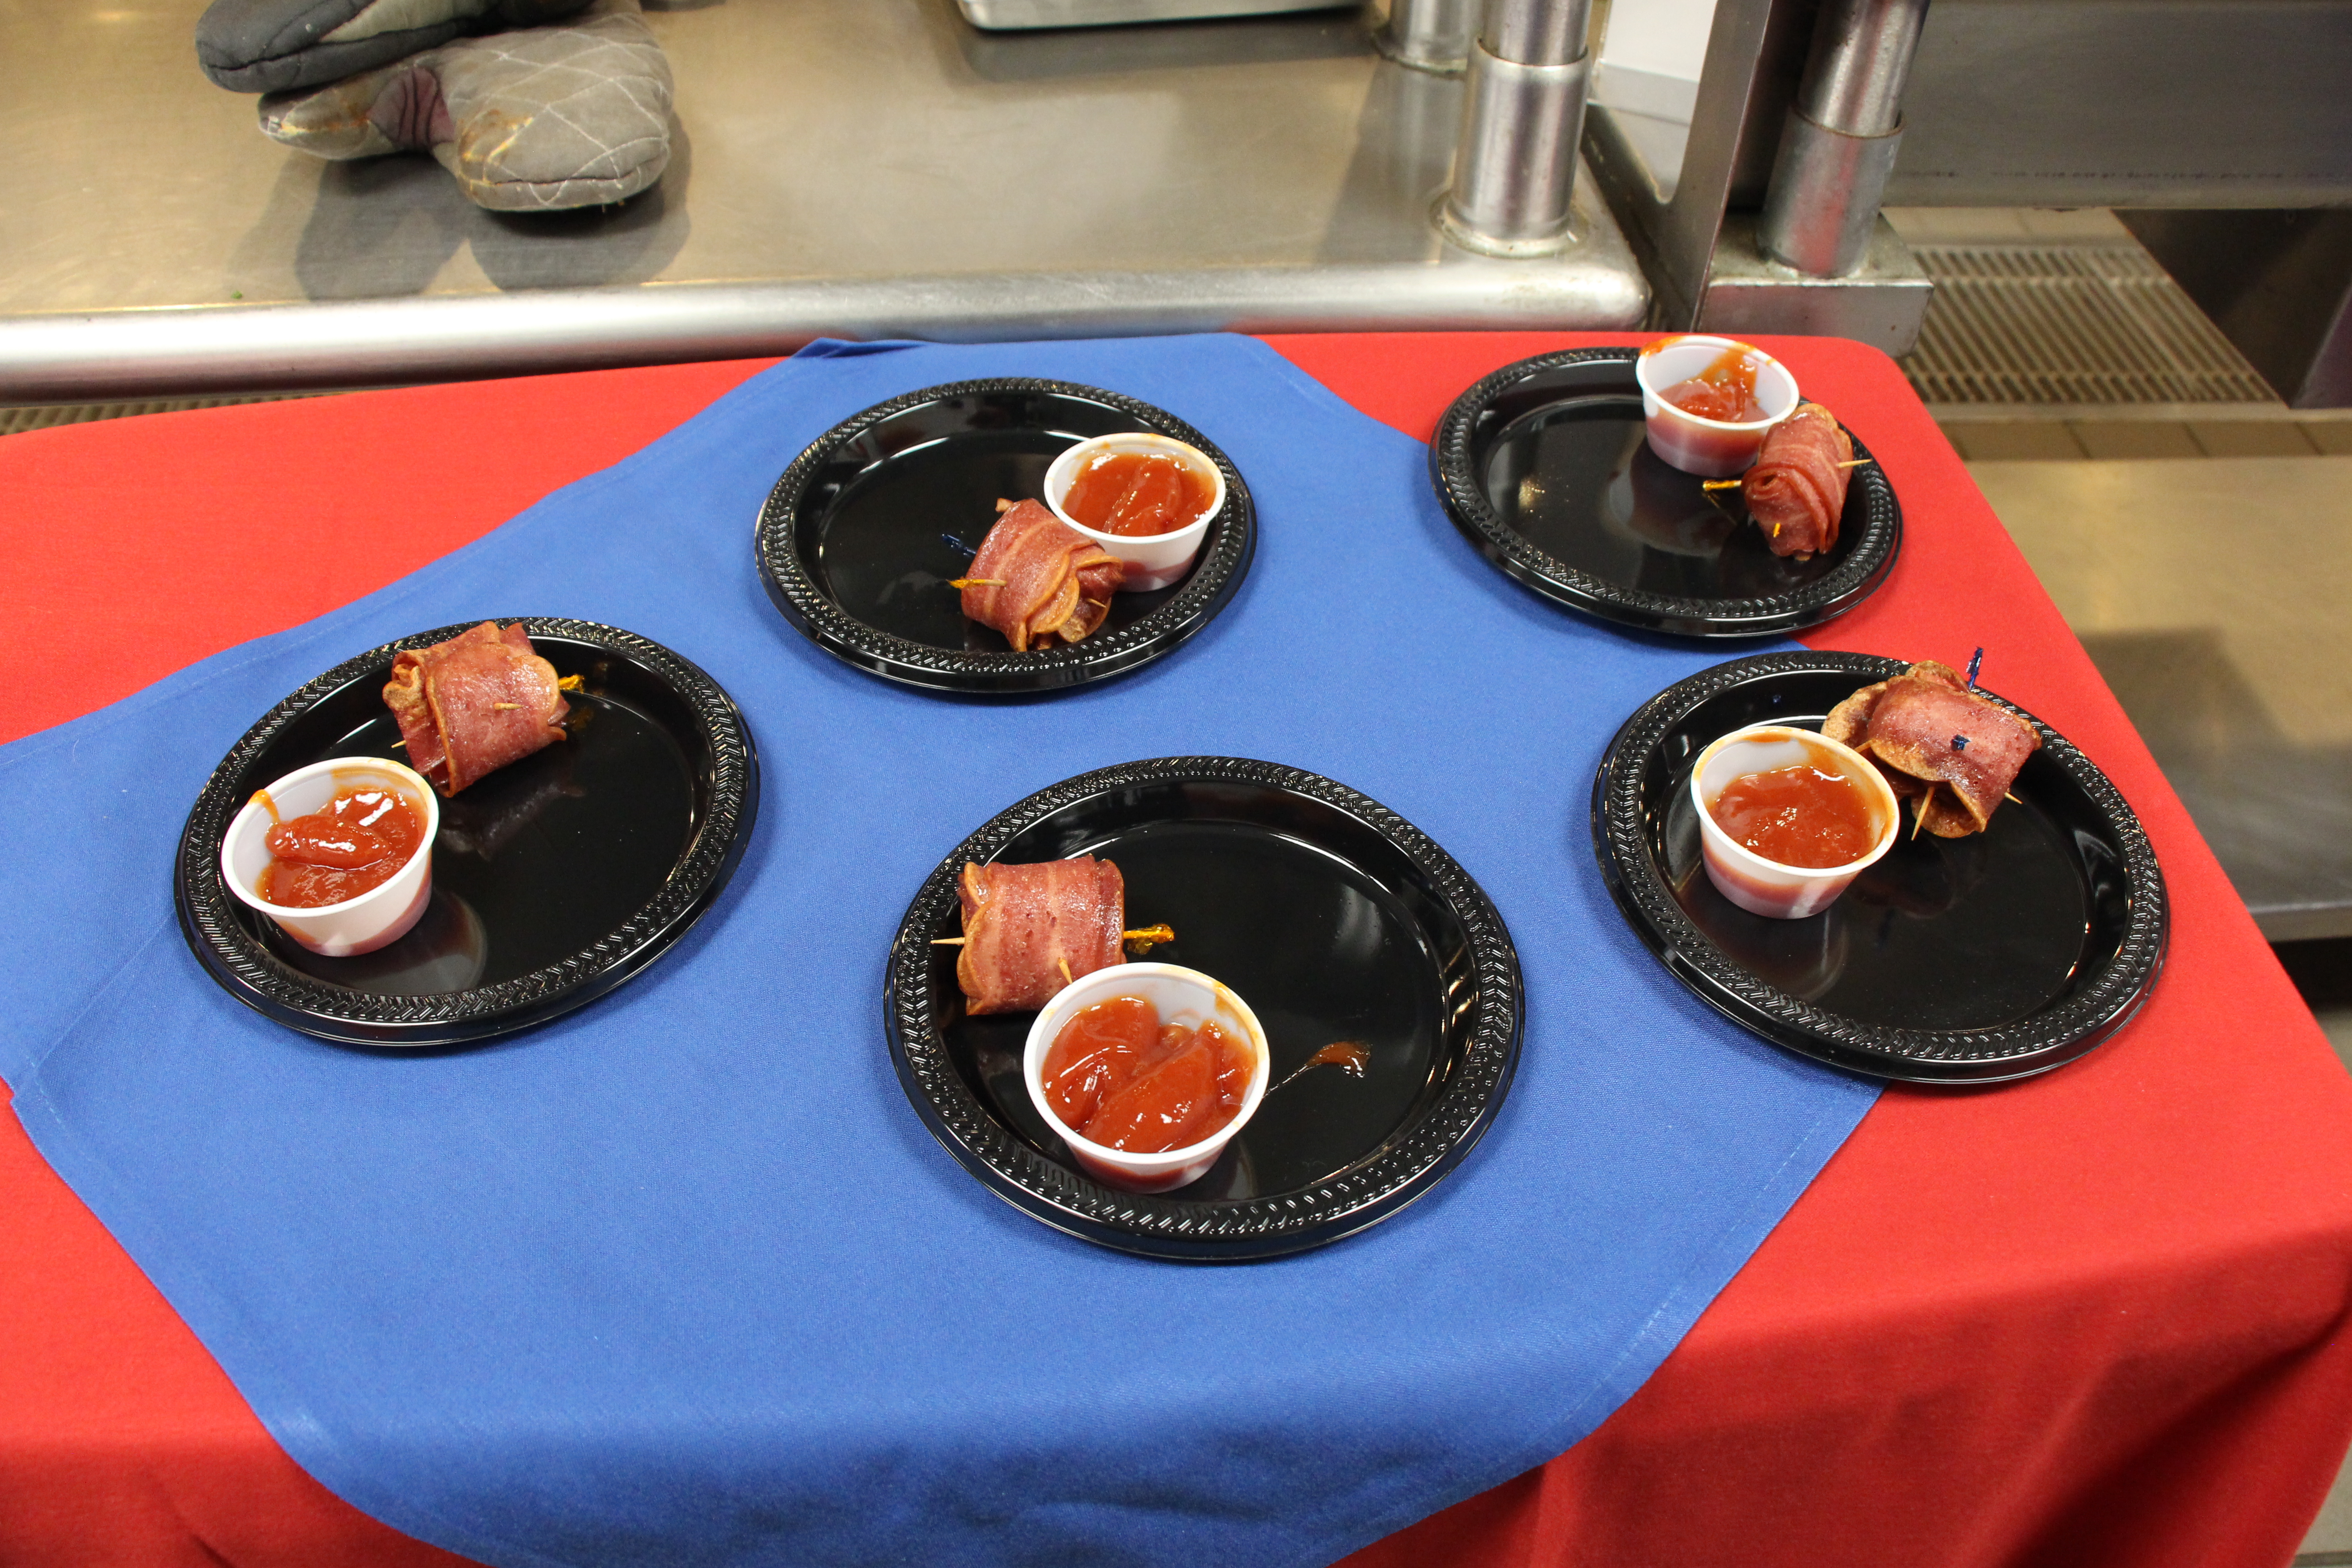 Photo: Chef's Competition - Kaiden's winning recipe was Bacon Wrapped Tater Tots with Cheese